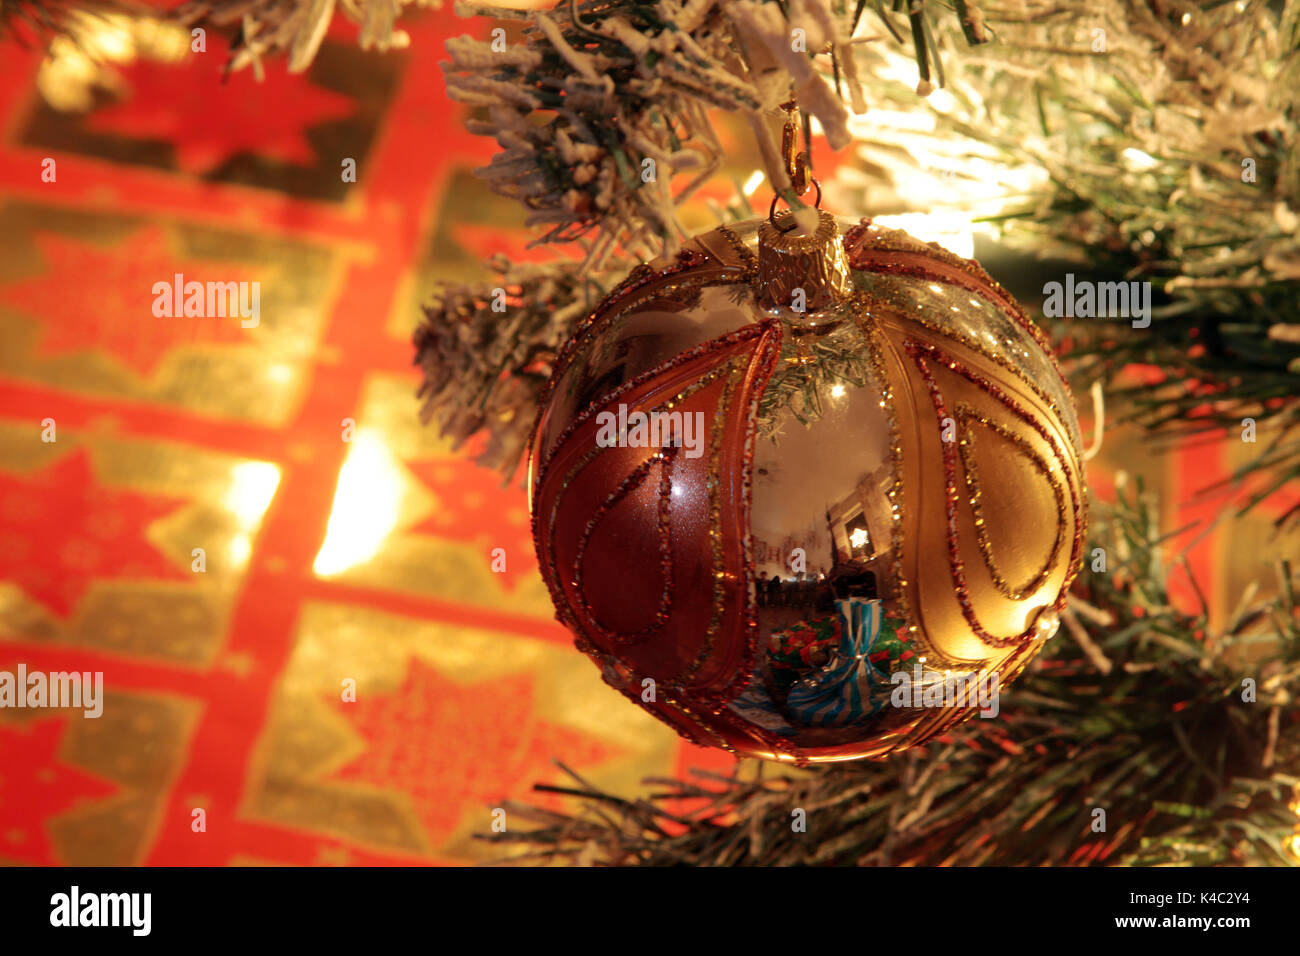 Christmas Tree Ornament With Wrapped Gifts Stock Photo